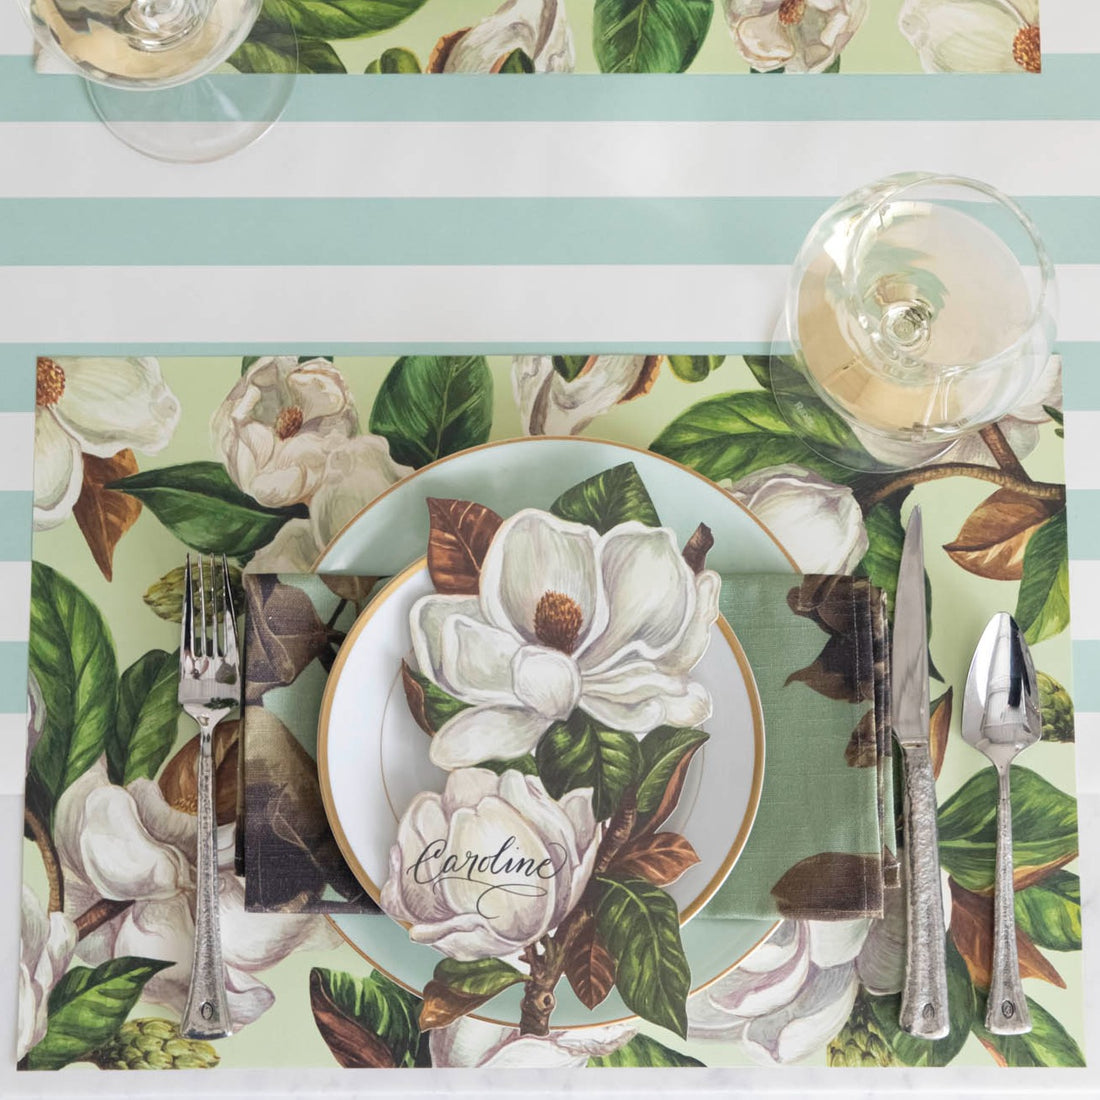 The Mint Magnolia Blooms Placemat under an elegant table setting, from above.